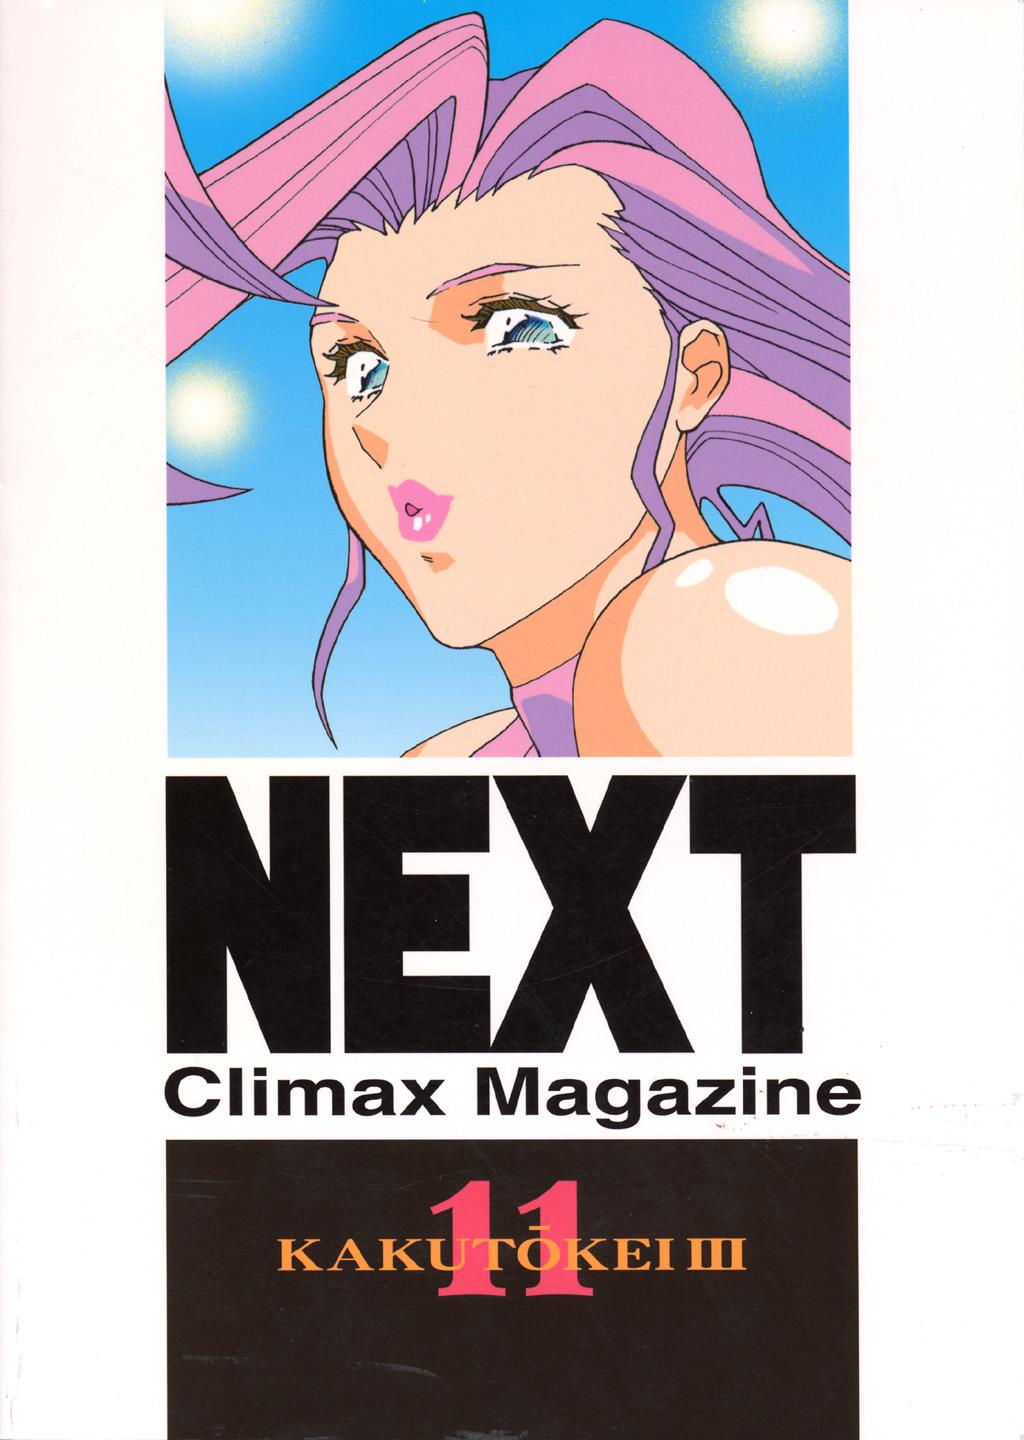 Asian Next Climax Magazine 11 - Kakutokei III - Street fighter Dead or alive The legend of zelda Cheating Wife - Page 98